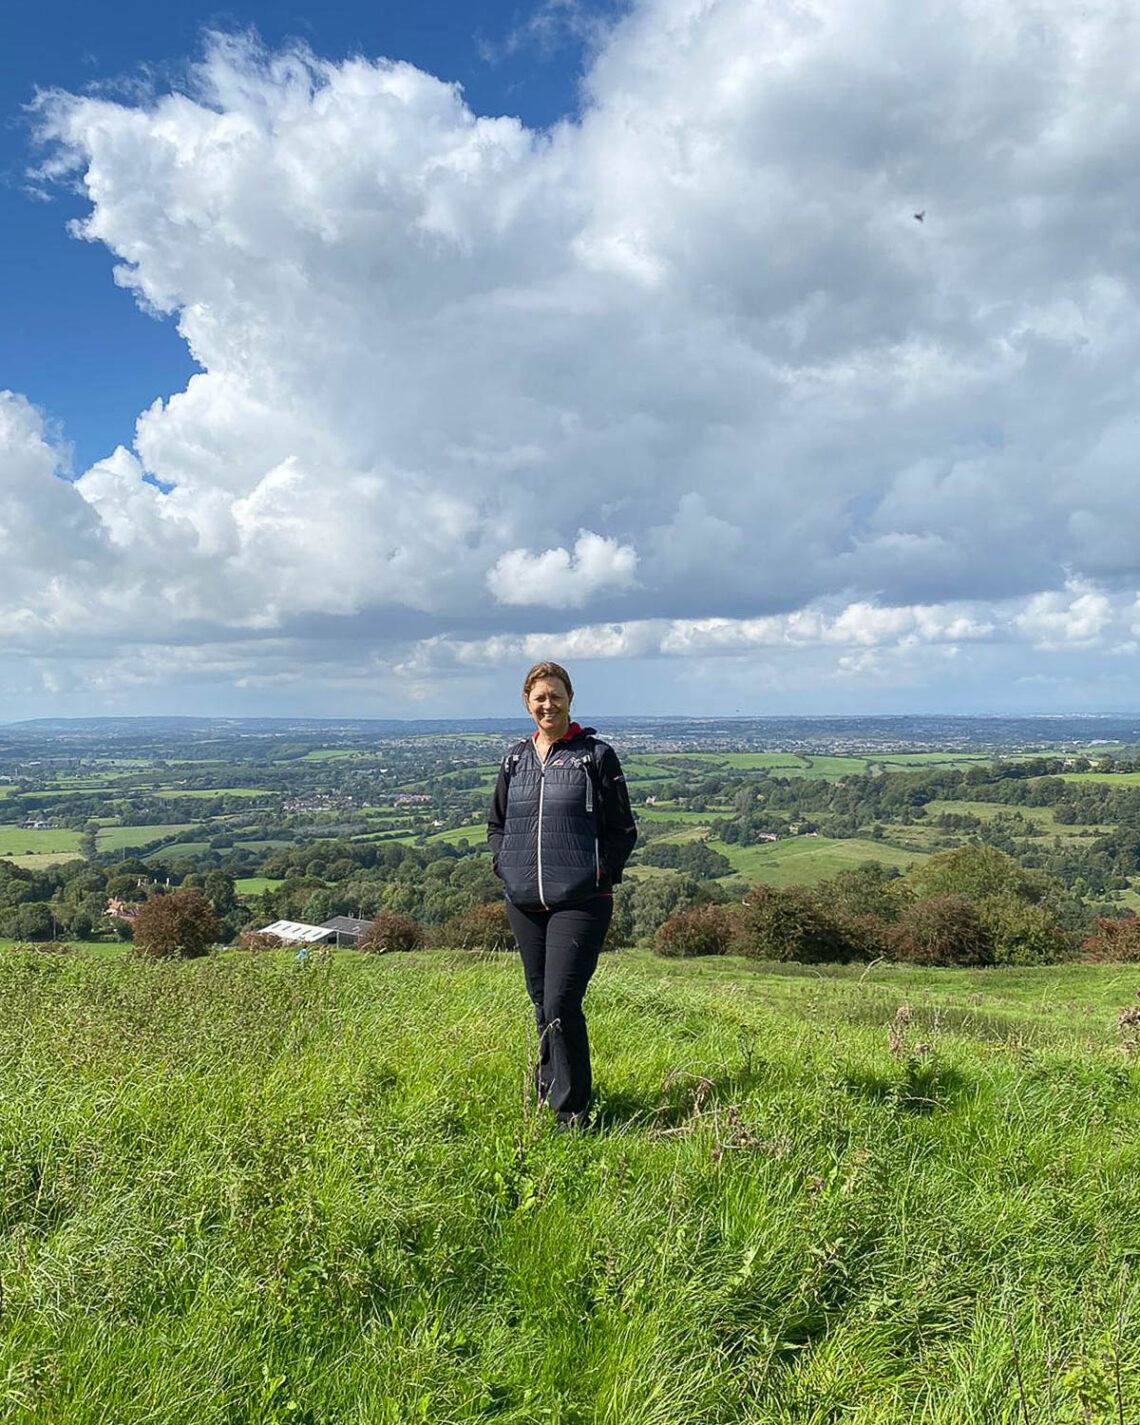 The Cotswold Way - Walking from Bath to Wotton-under-Edge